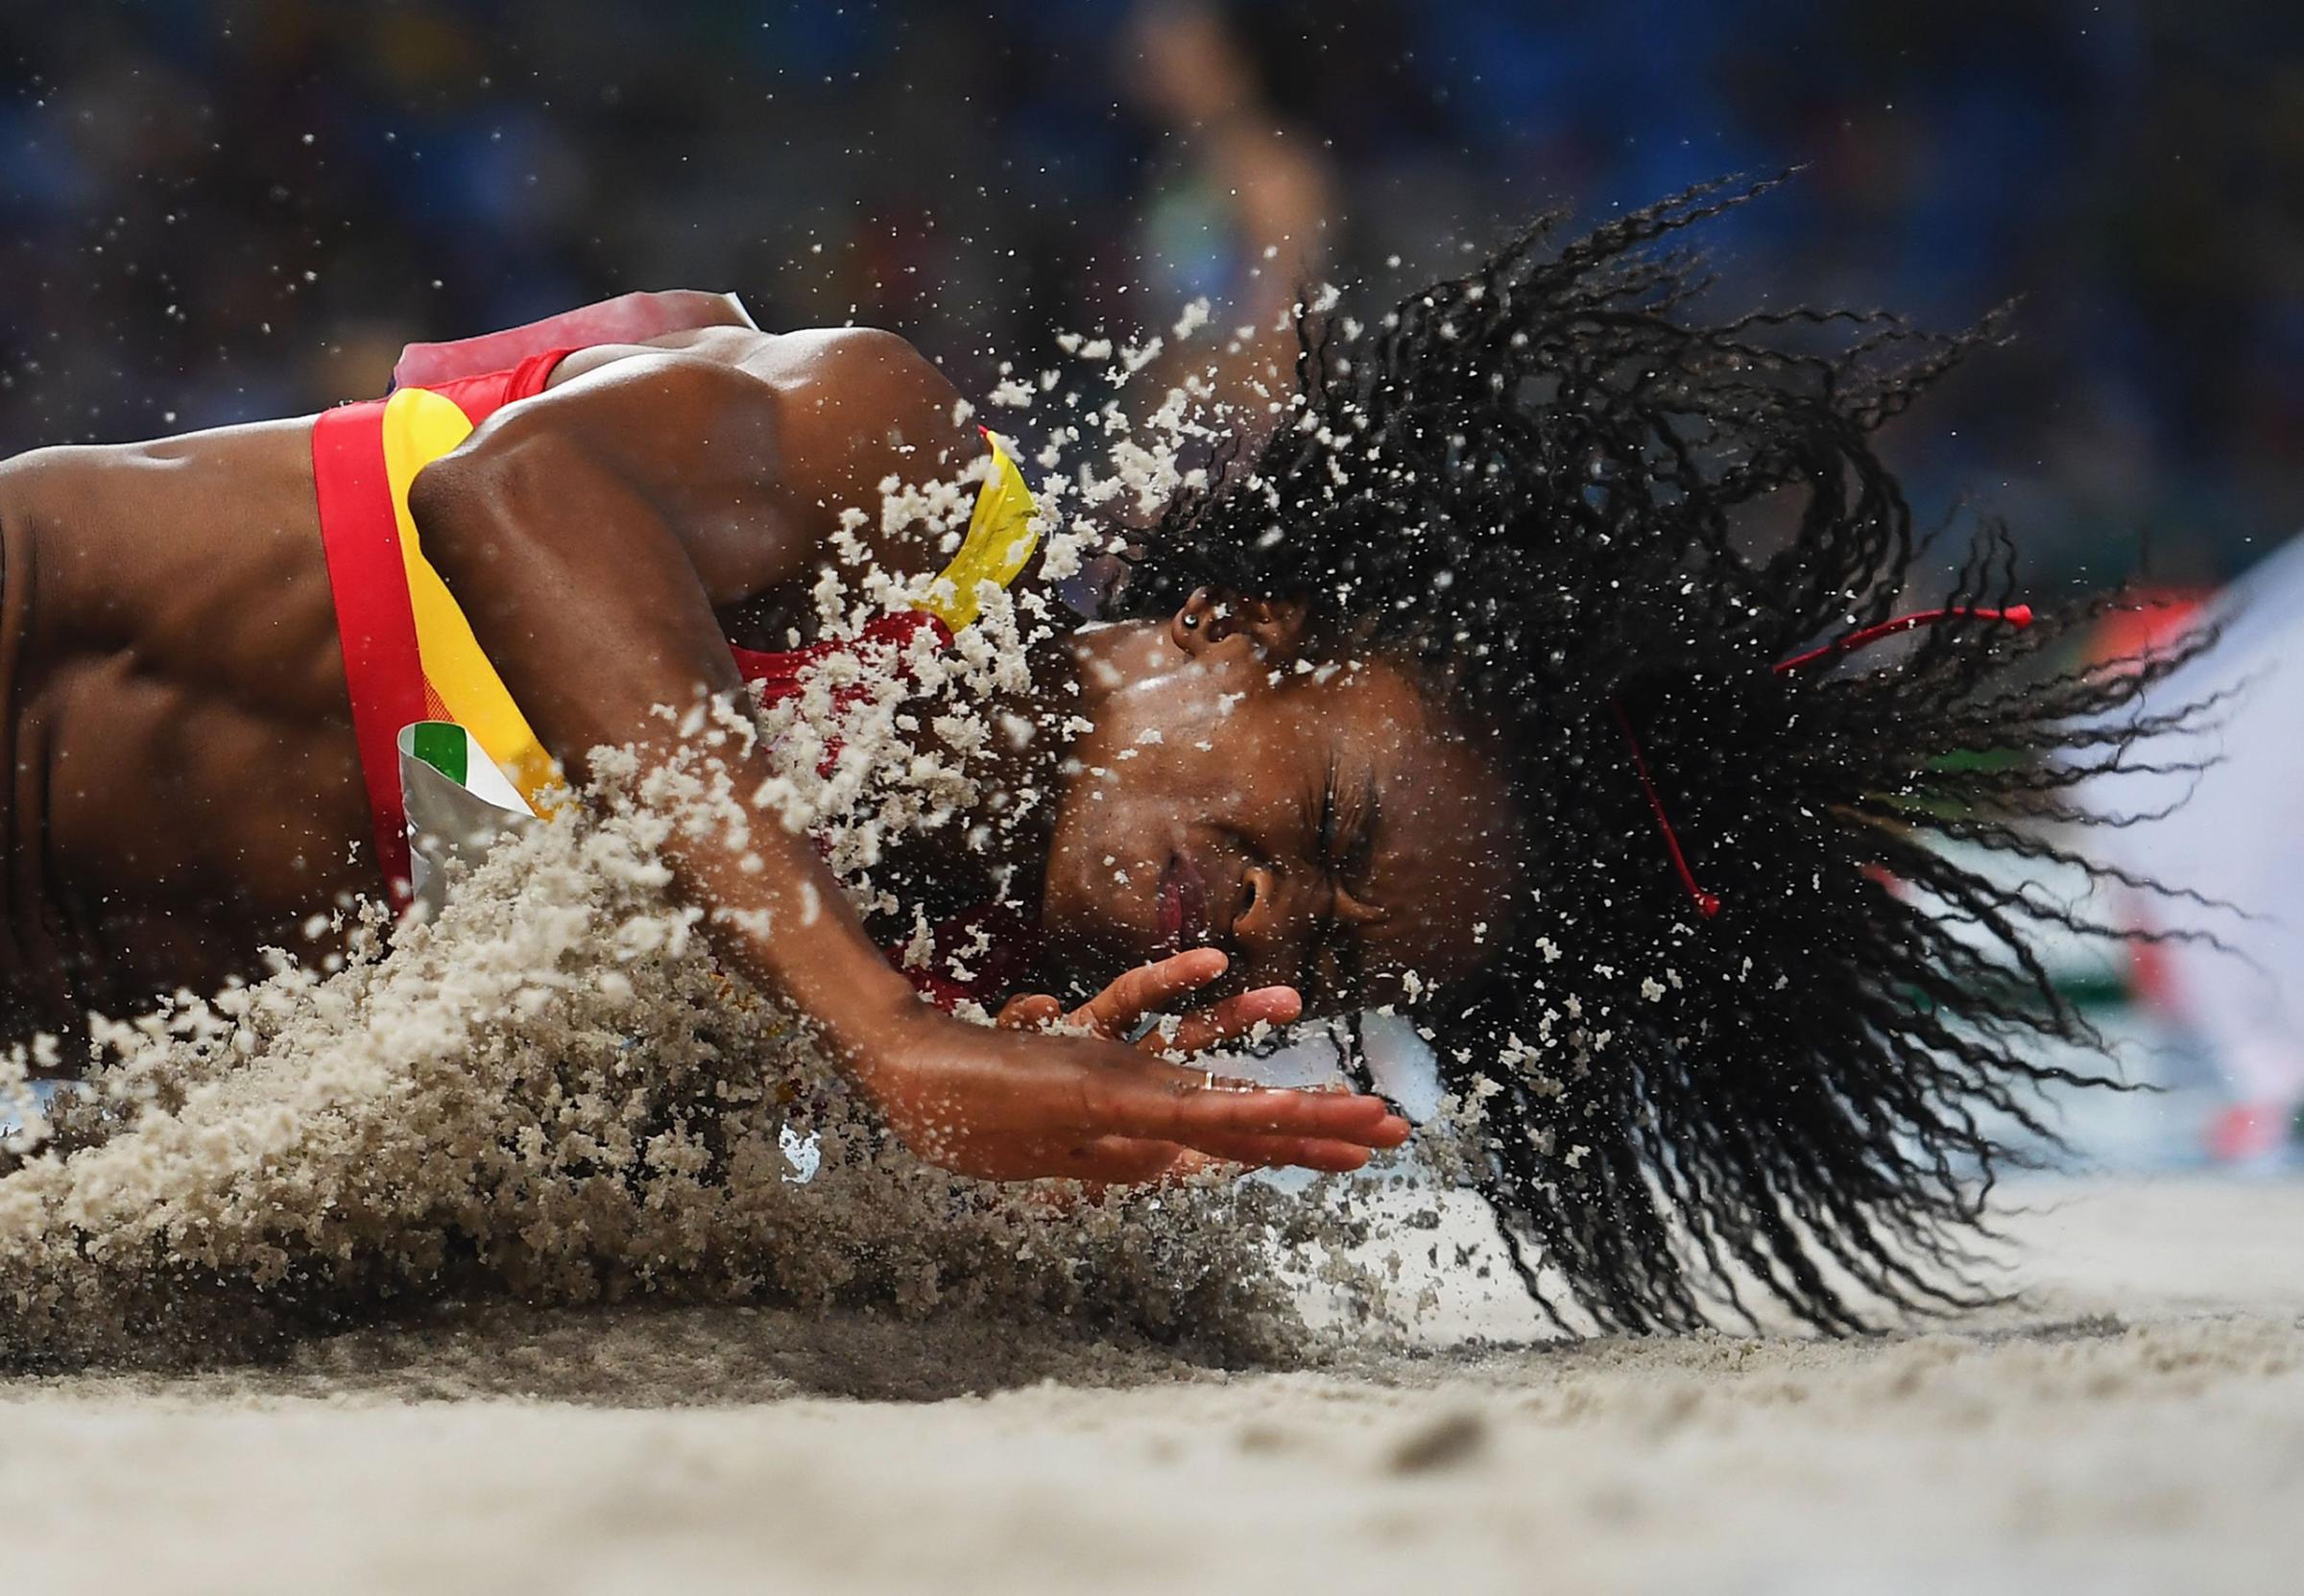 Juliet Itoya of Spain competes during the Women's Long Jump Qualifying Round on Day 11 of the Rio 2016 Olympic Games at the Olympic Stadium in Rio de Janeiro, Brazil, on Aug. 16, 2016.